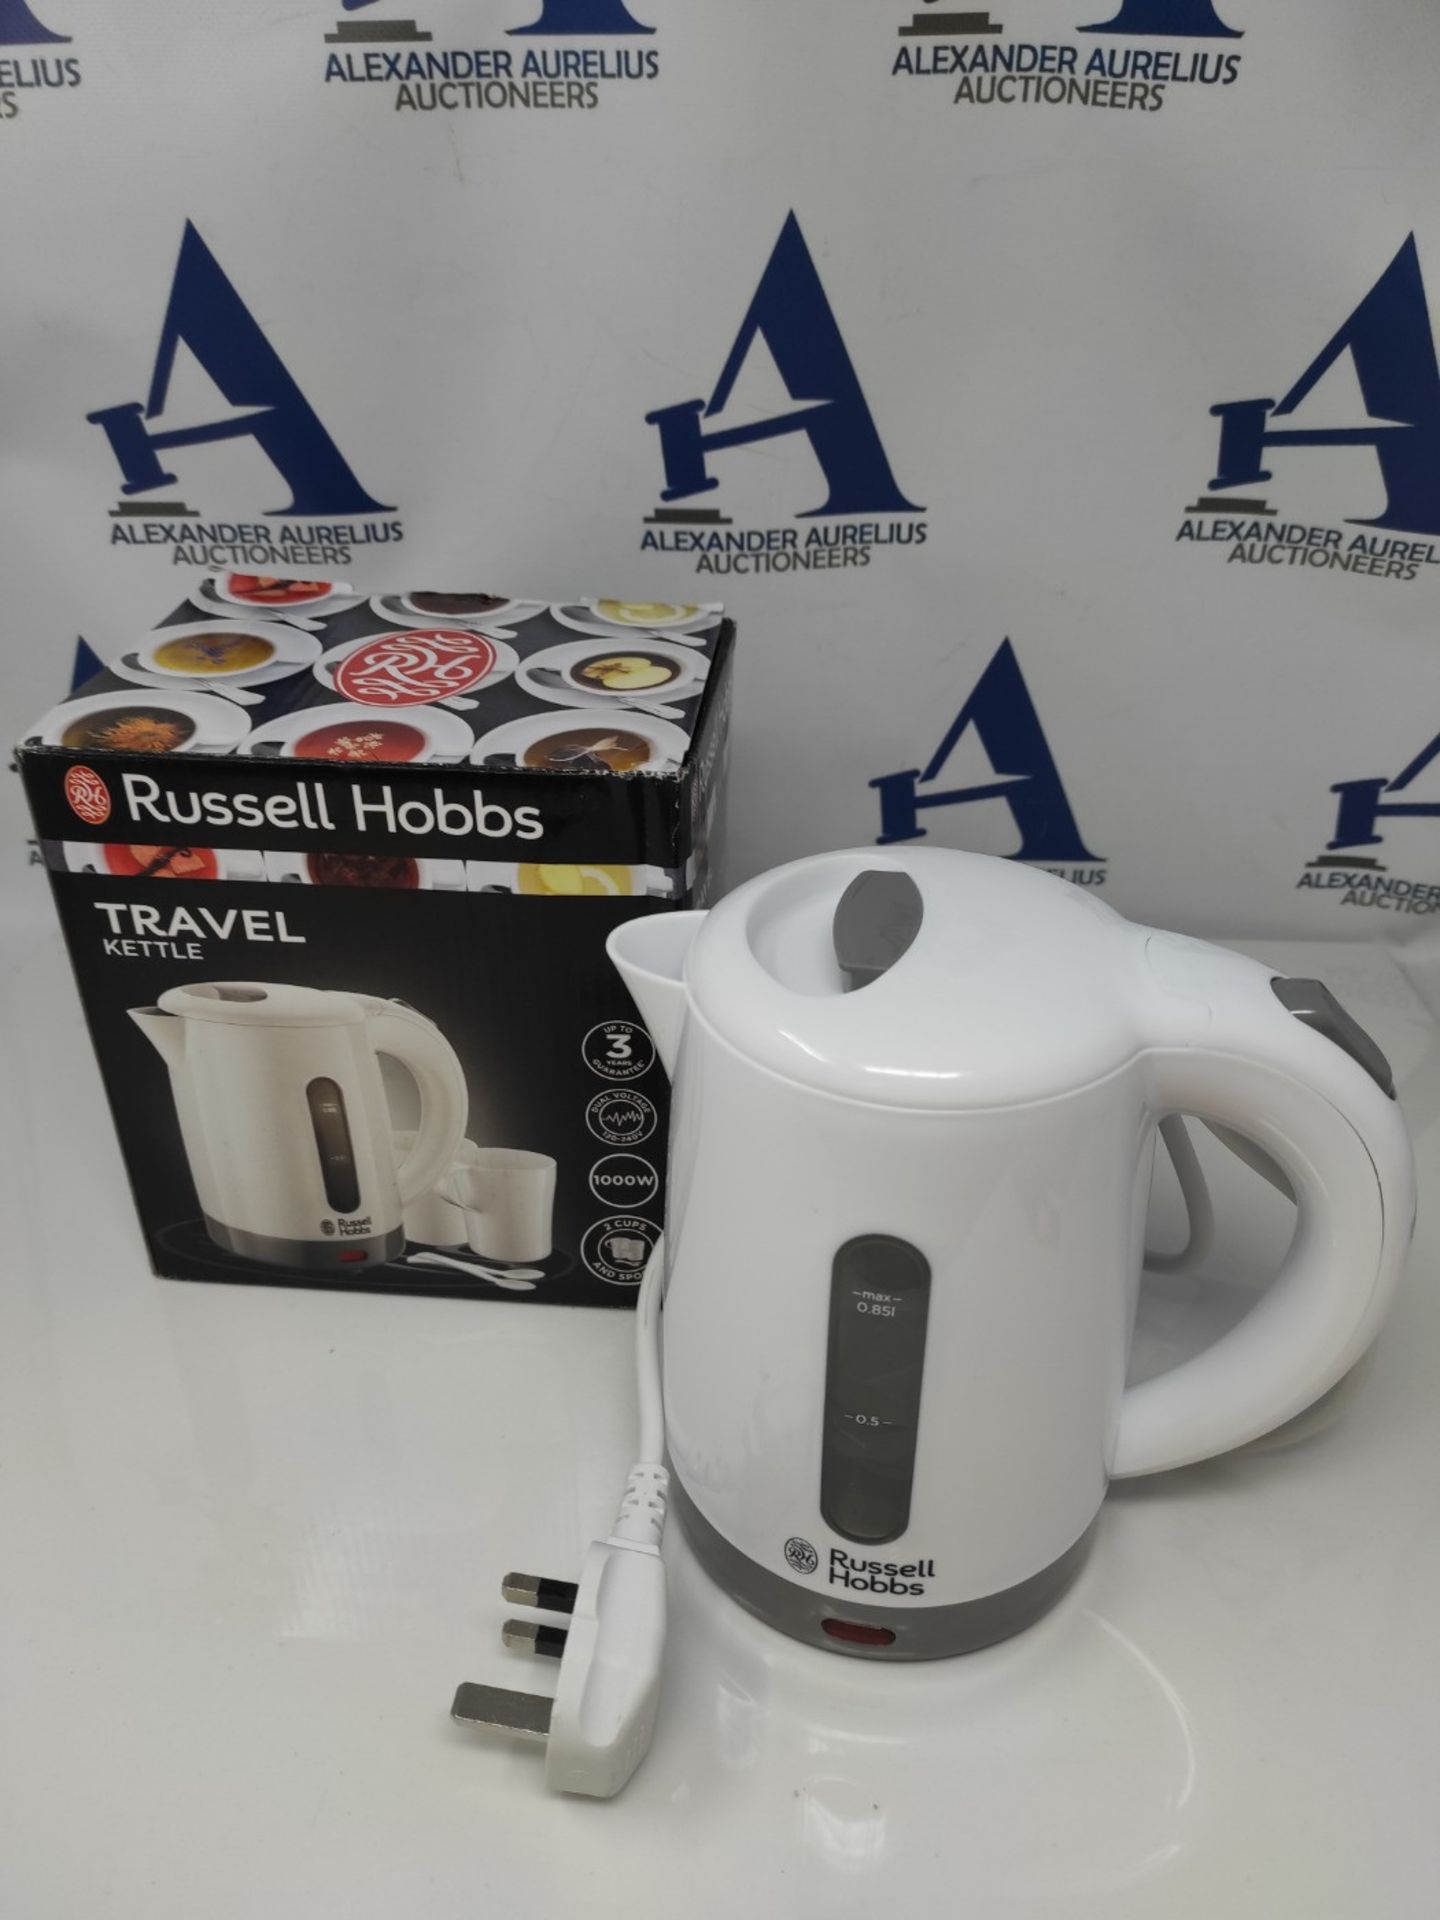 Russell Hobbs 23840 Compact Travel Electric Kettle, Plastic, 1000 W, White - Image 2 of 2